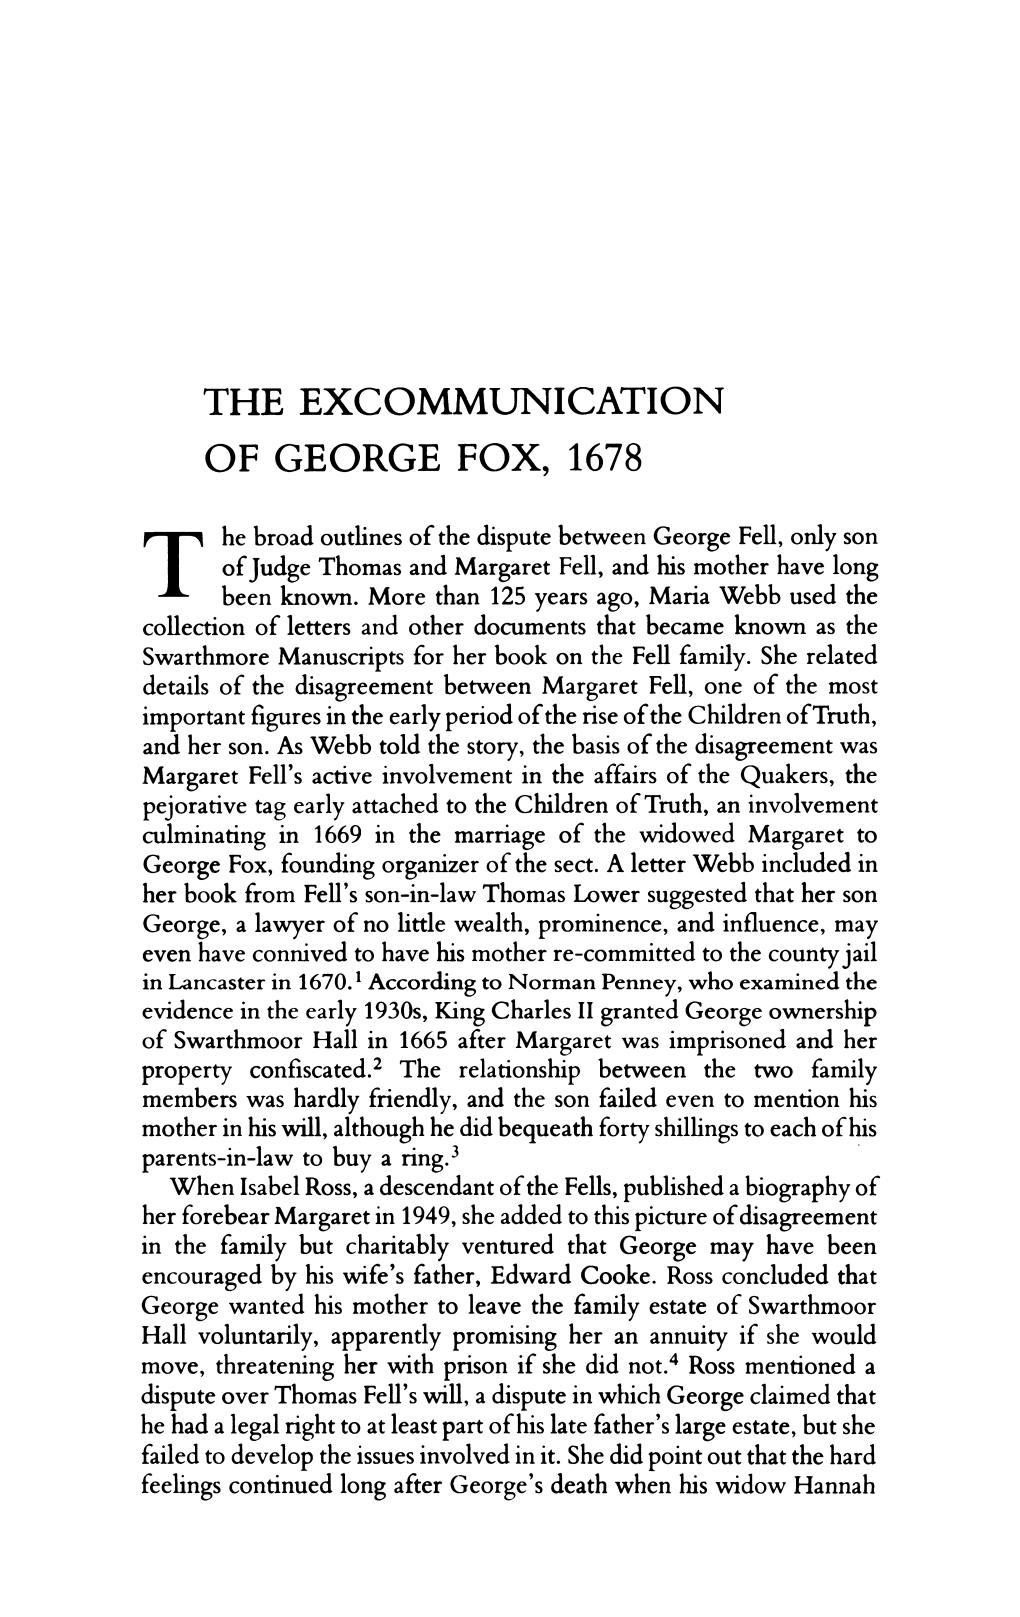 The Excommunication of George Fox, 1678